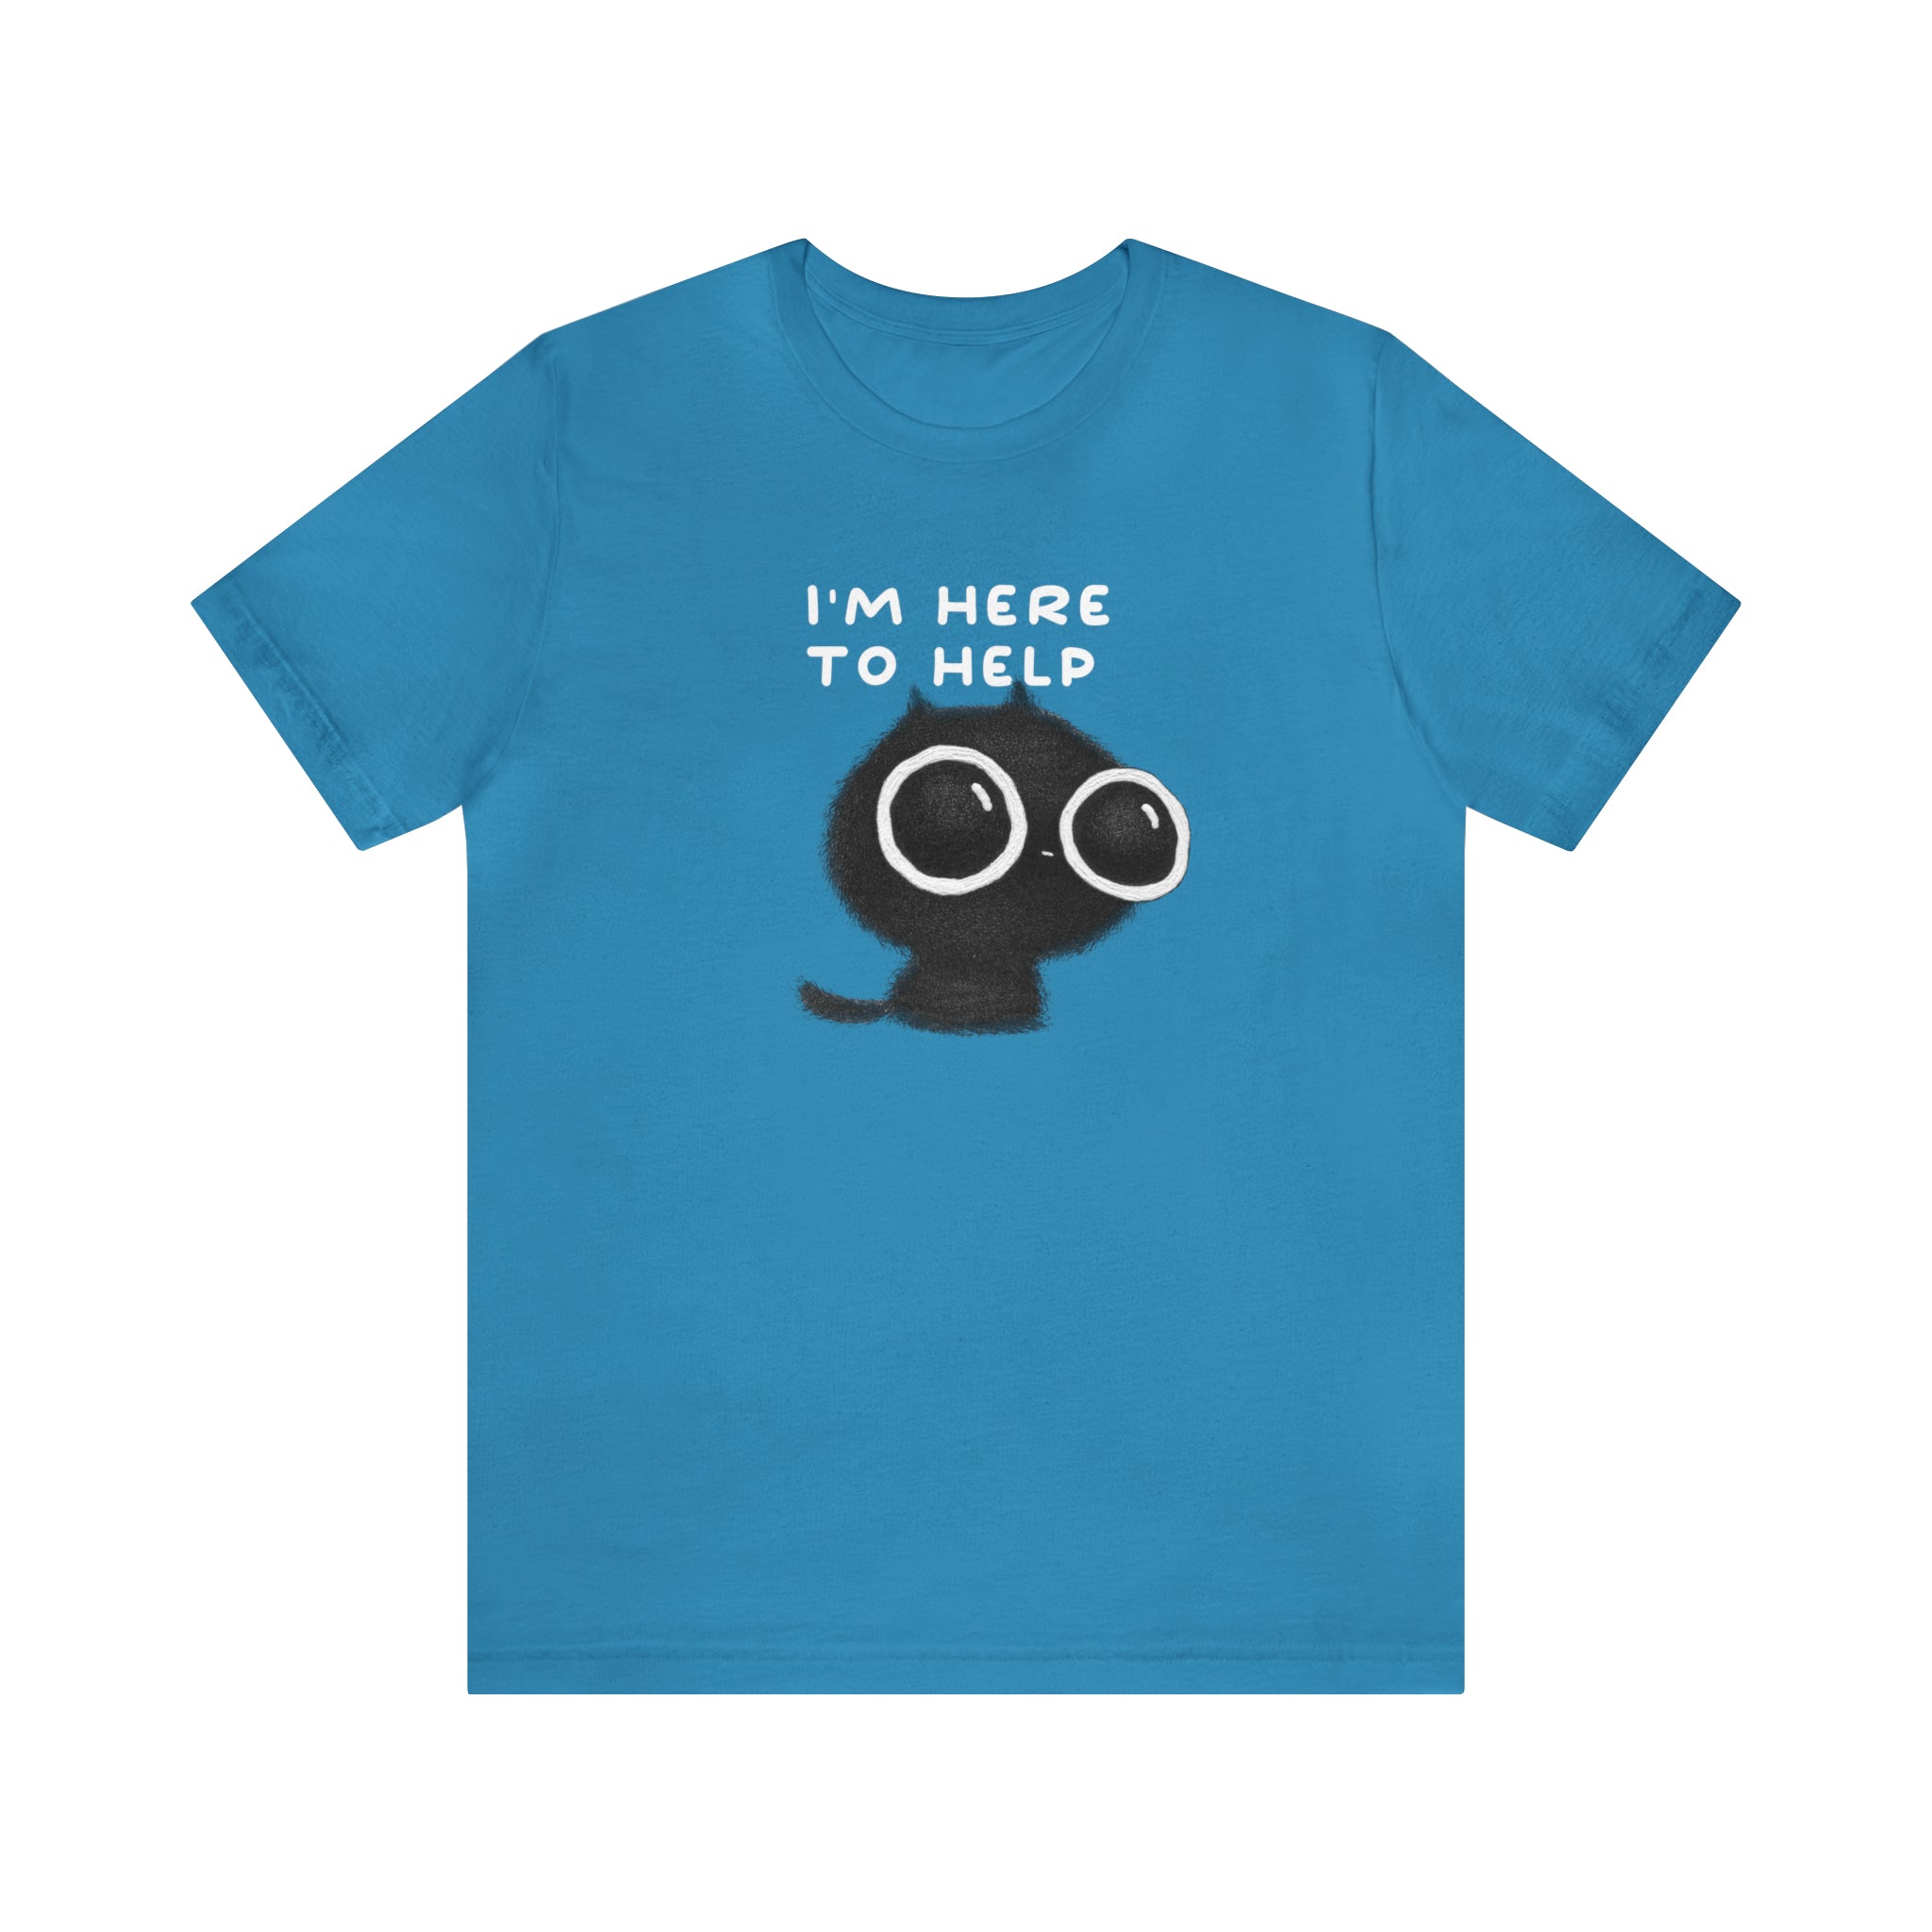 I'm Here to Help : Unisex 100% Comfy Cotton, T-Shirt by Bella+Canvas